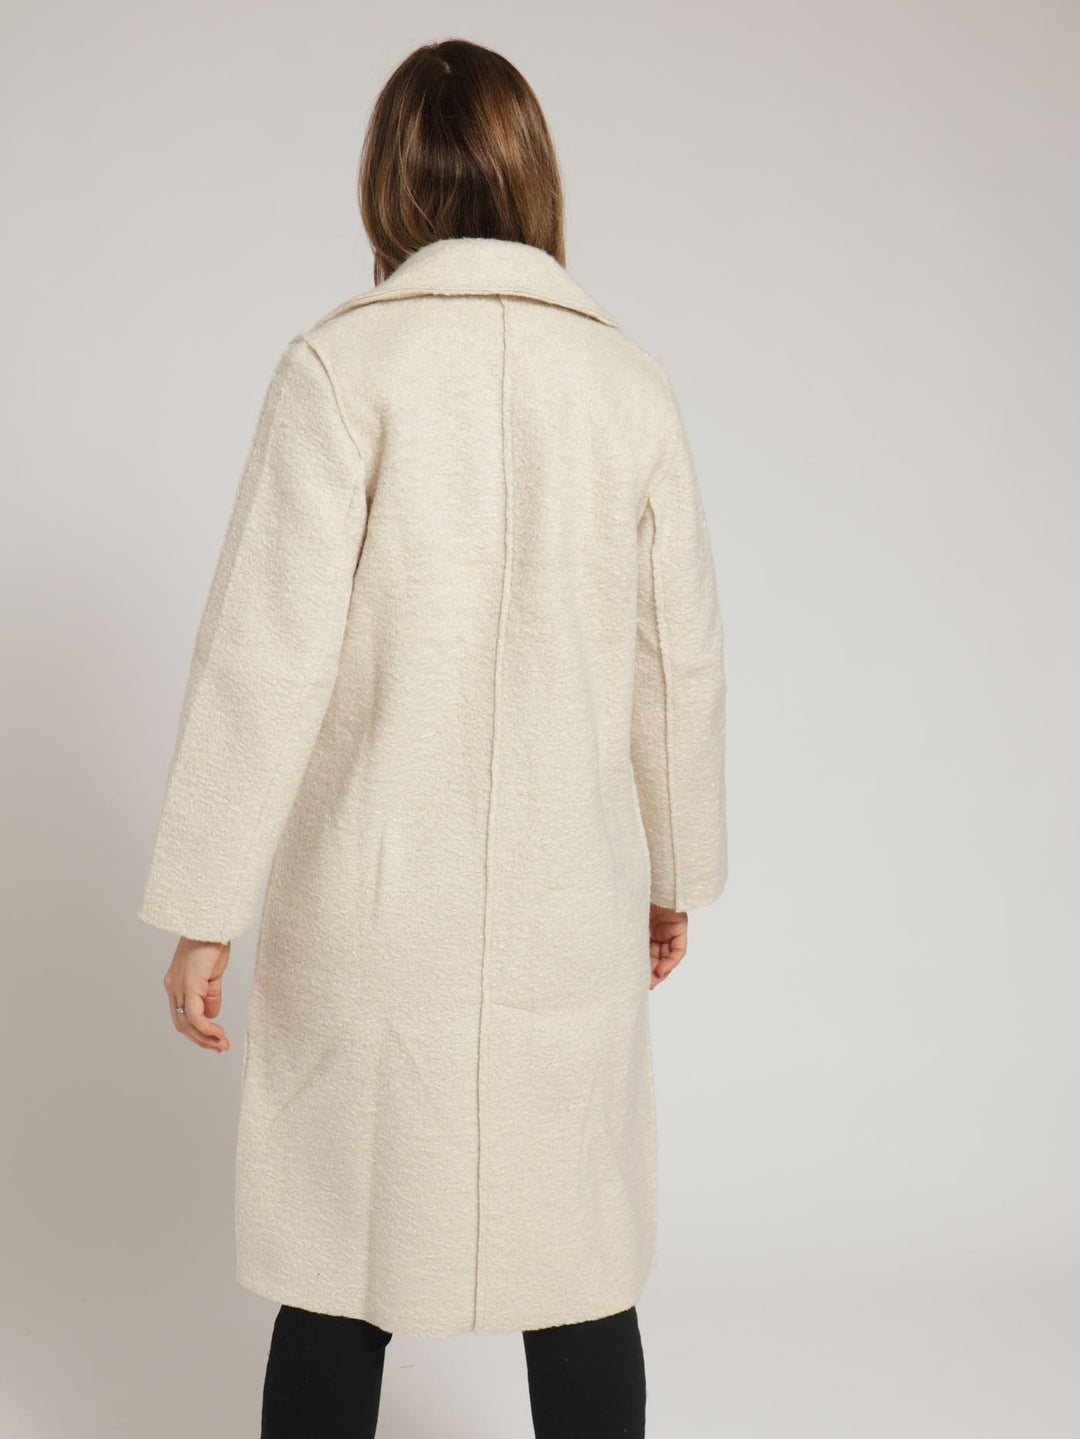 Textured Two Button Coat - Cream